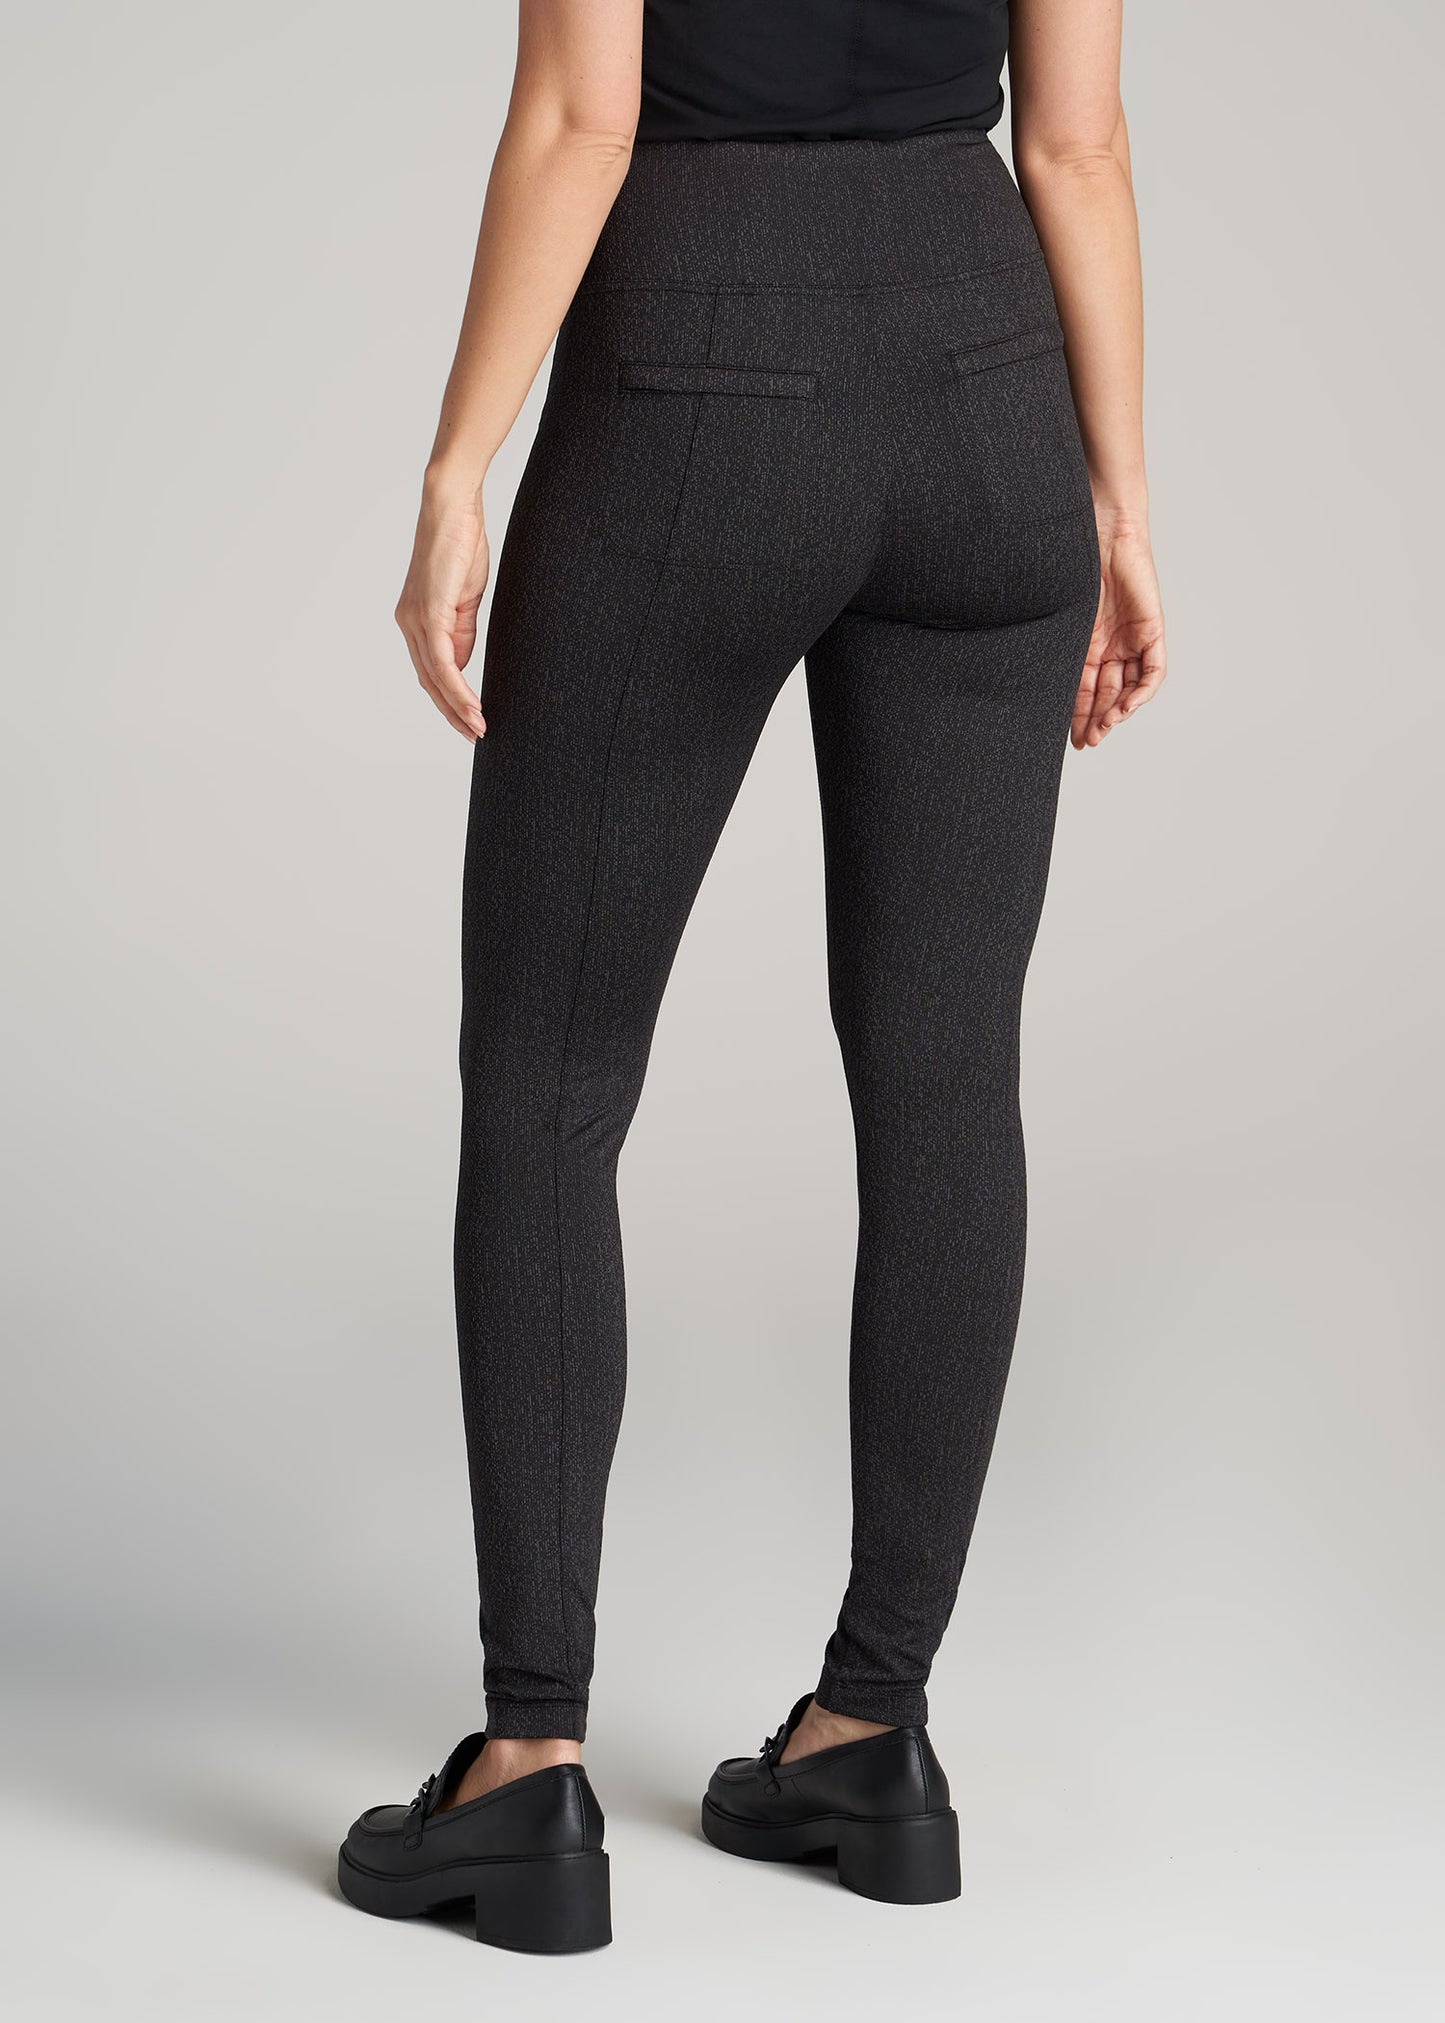 A tall woman wearing American Tall's Textured Back Pocket Legging in black charcoal.